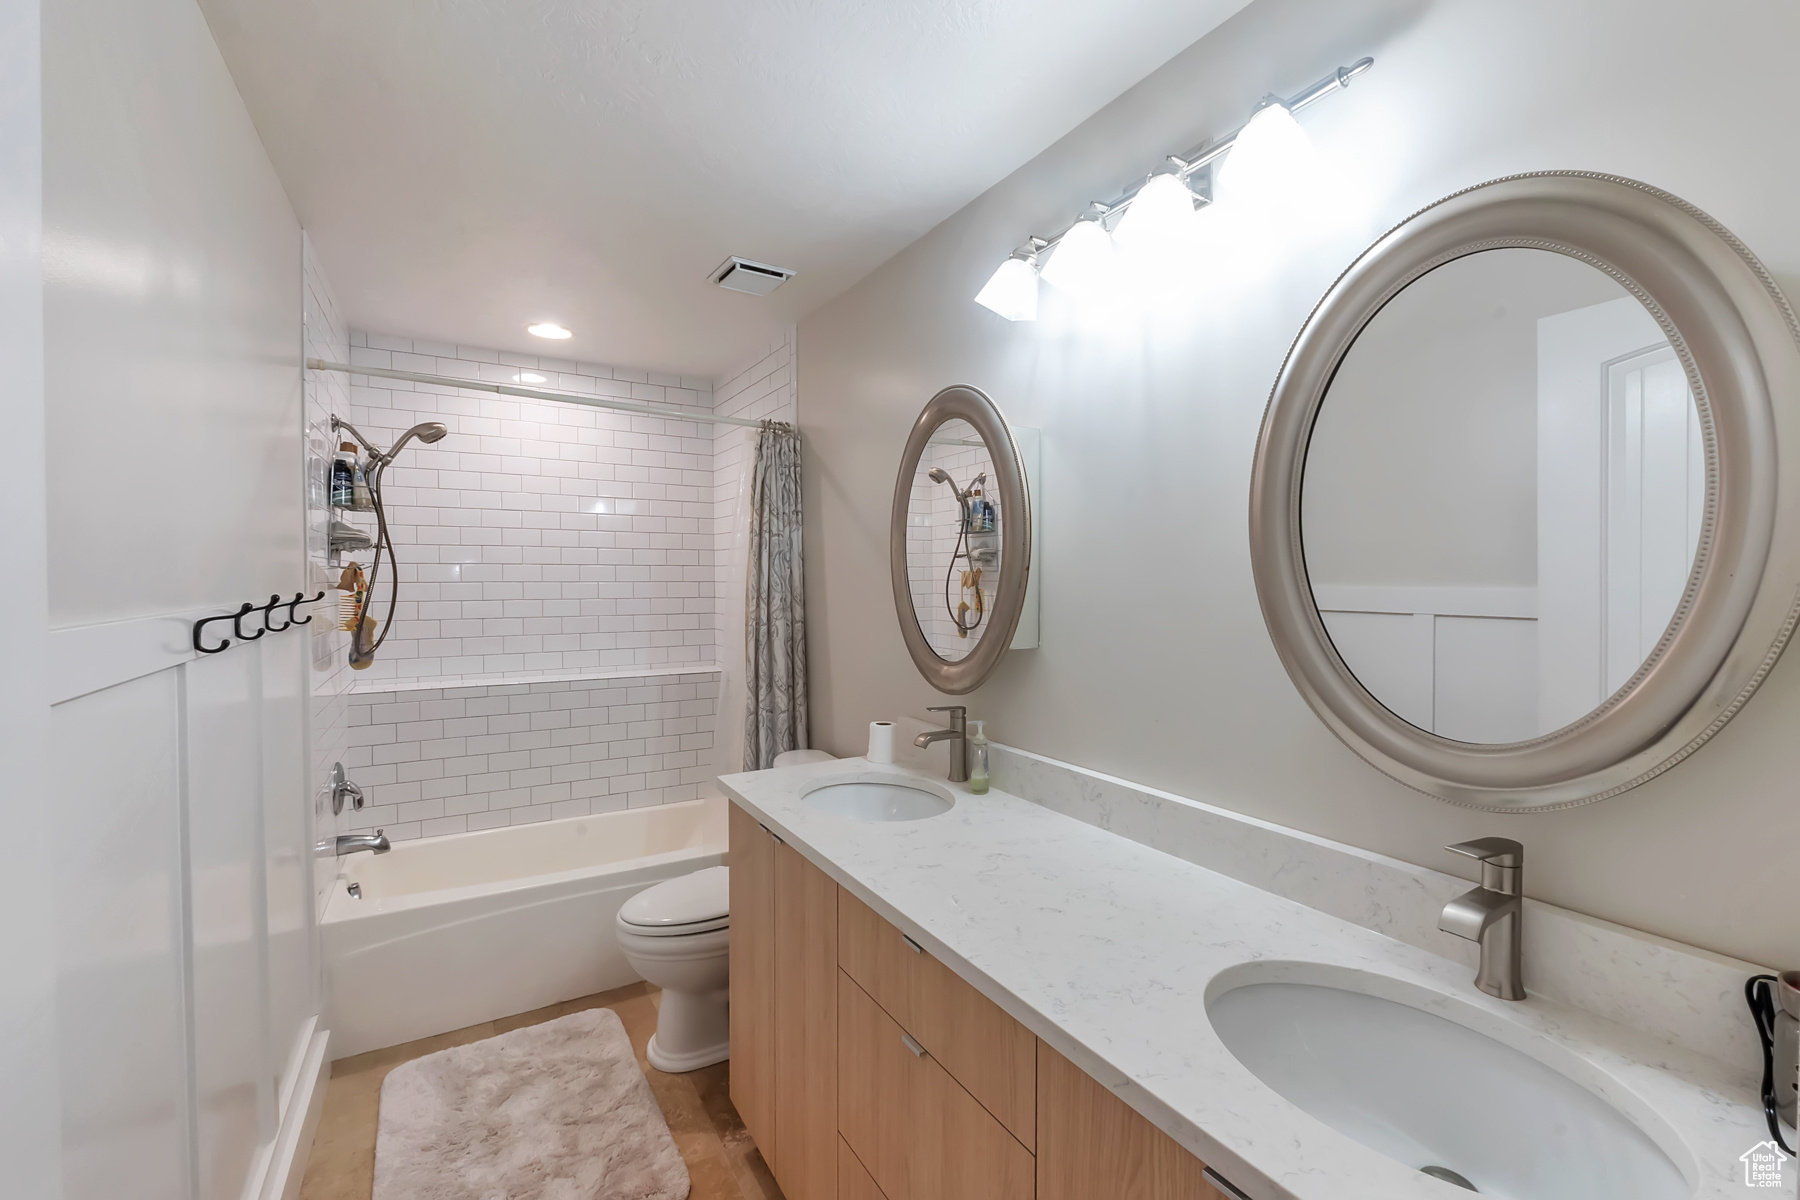 Full bathroom featuring tile floors, shower / tub combo, toilet, and dual bowl vanity